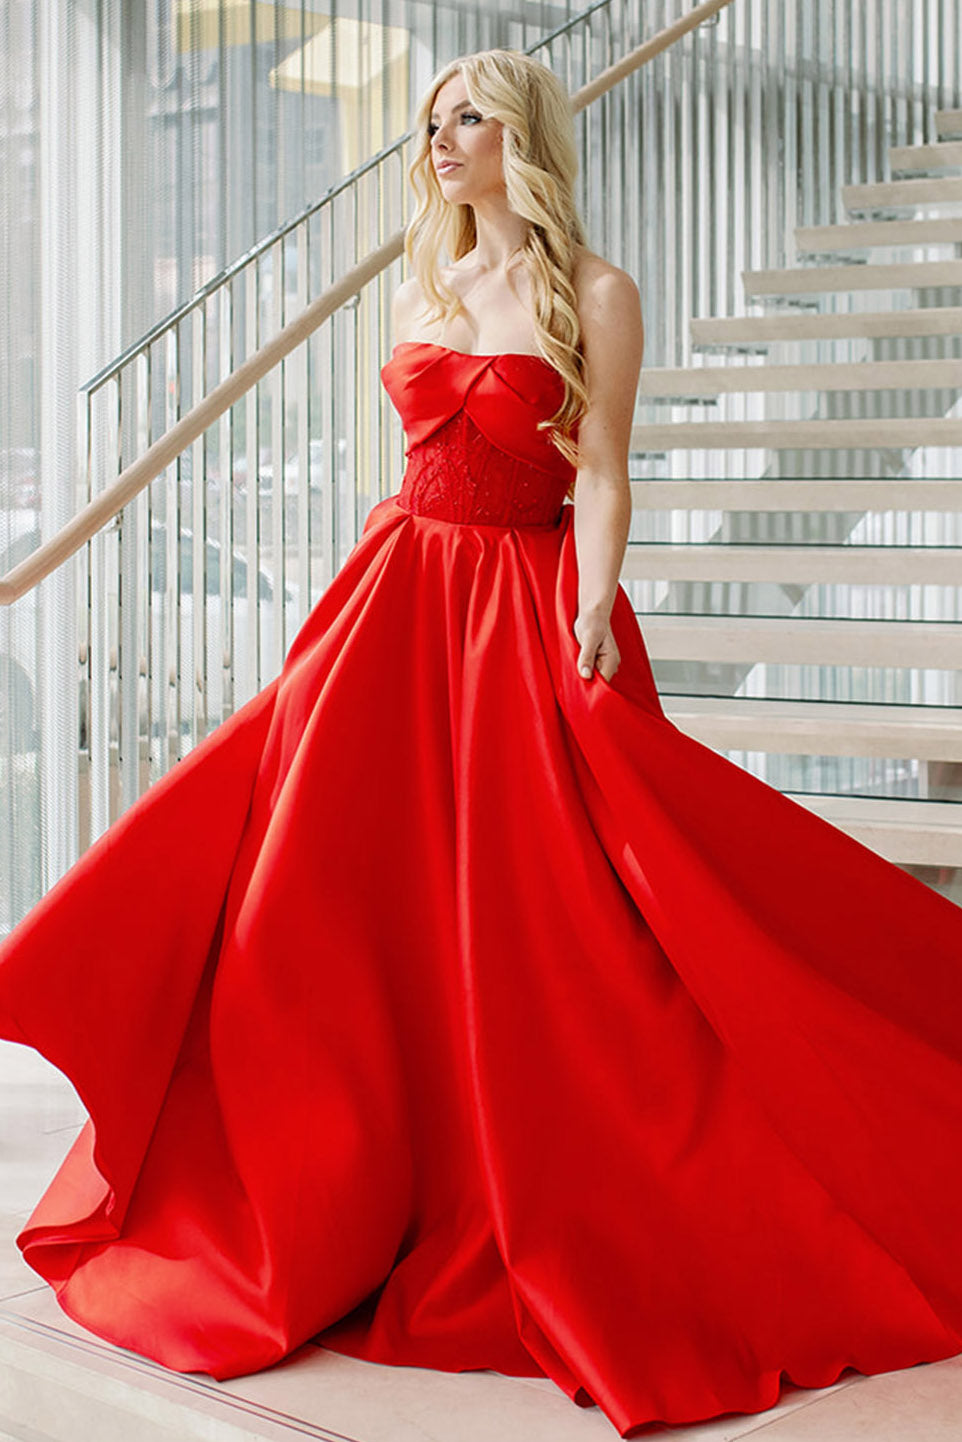 Luxury Strapless Ball Gowns, Lace Evening Dresses For Adults - Women